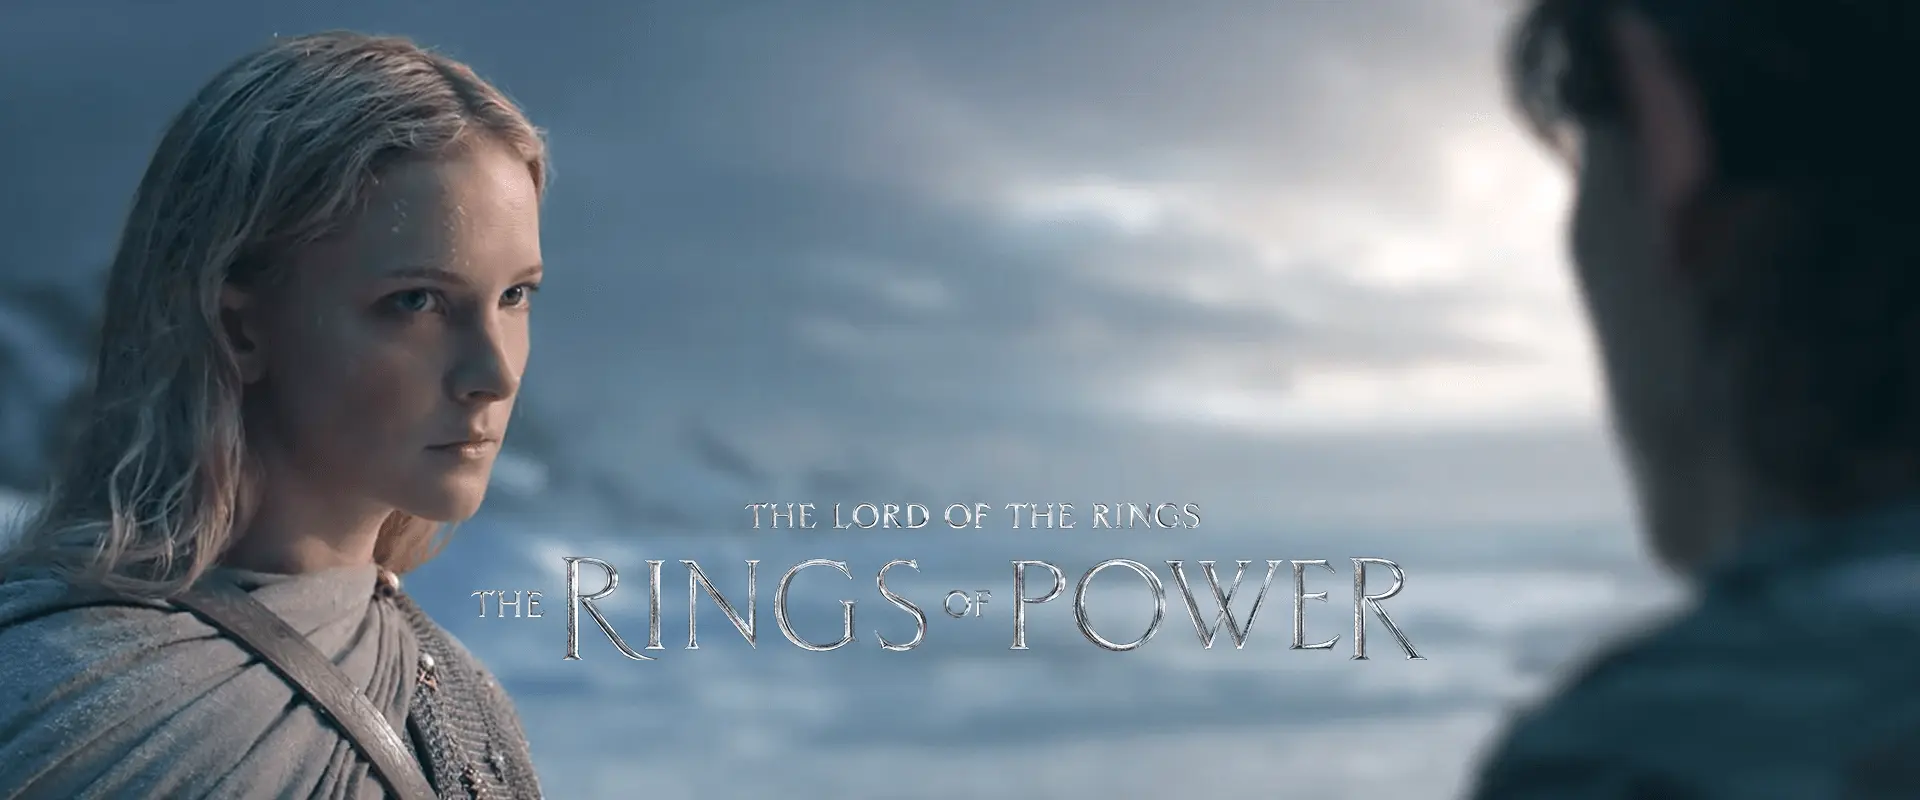 The_Lord_of_the_Rings_The_Rings_of_Power